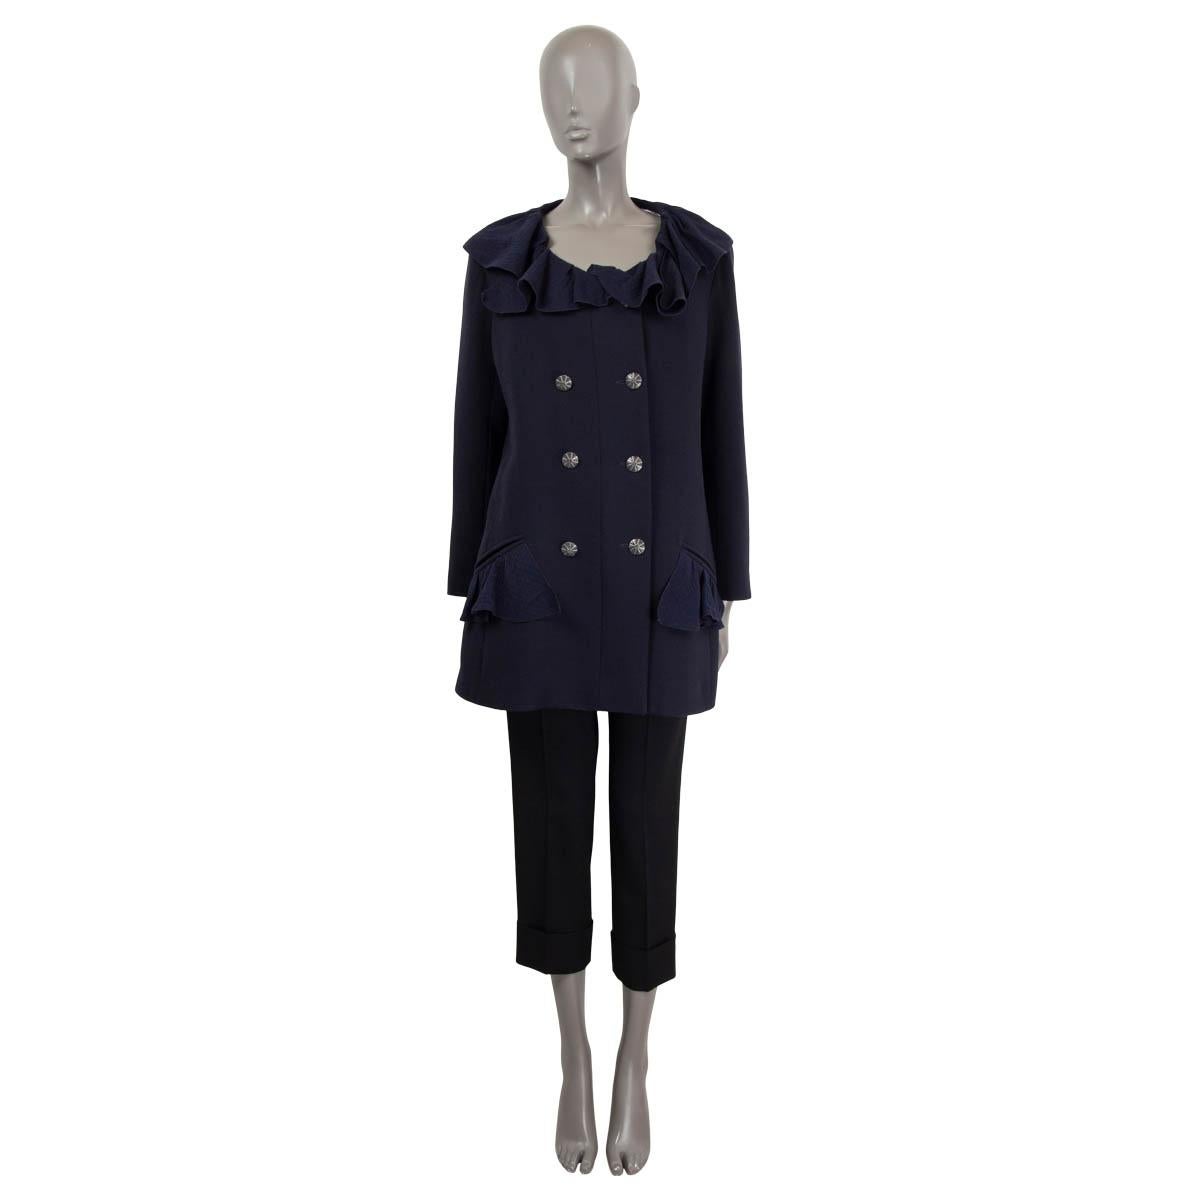 100% authentic Chanel 2020 ruffled double-breasted jacket in navy wool (100%) and details in silk (100%). Opens with embellished gunmetal buttons to a black & white striped logo lining in cotton (100%). The design features two slit front pockets